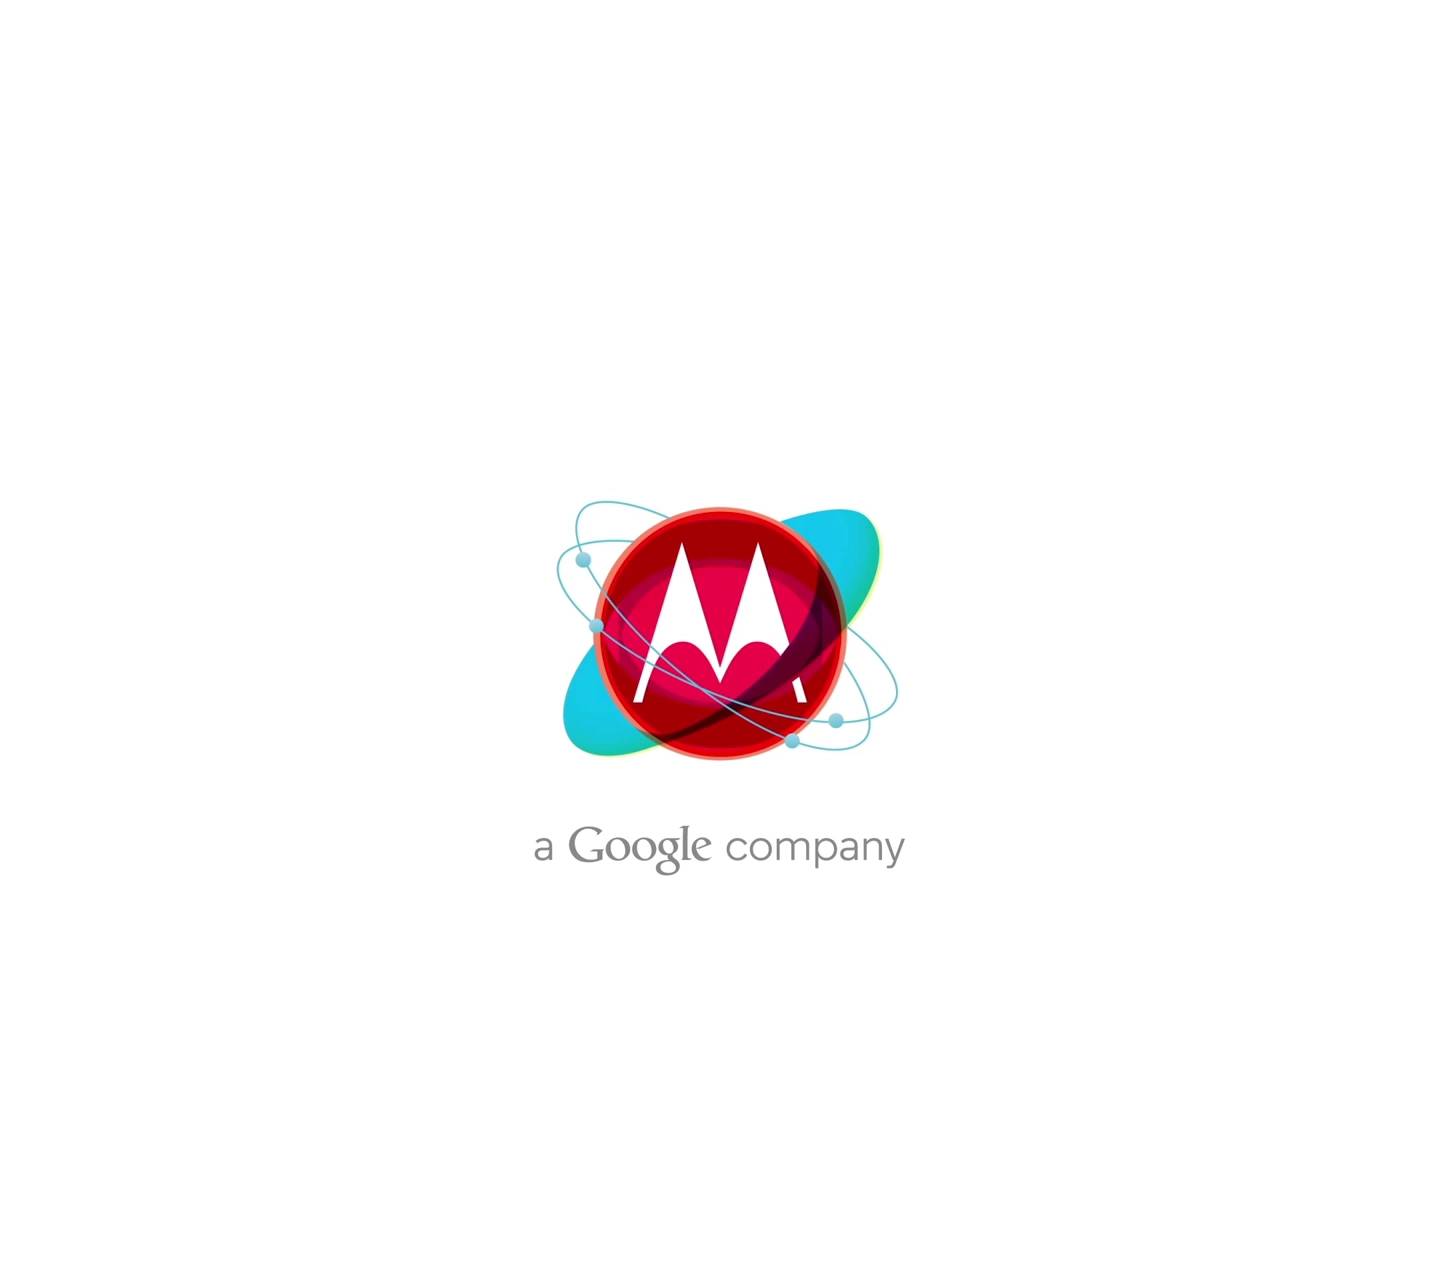 Download free motorola logo wallpapers for your mobile phone